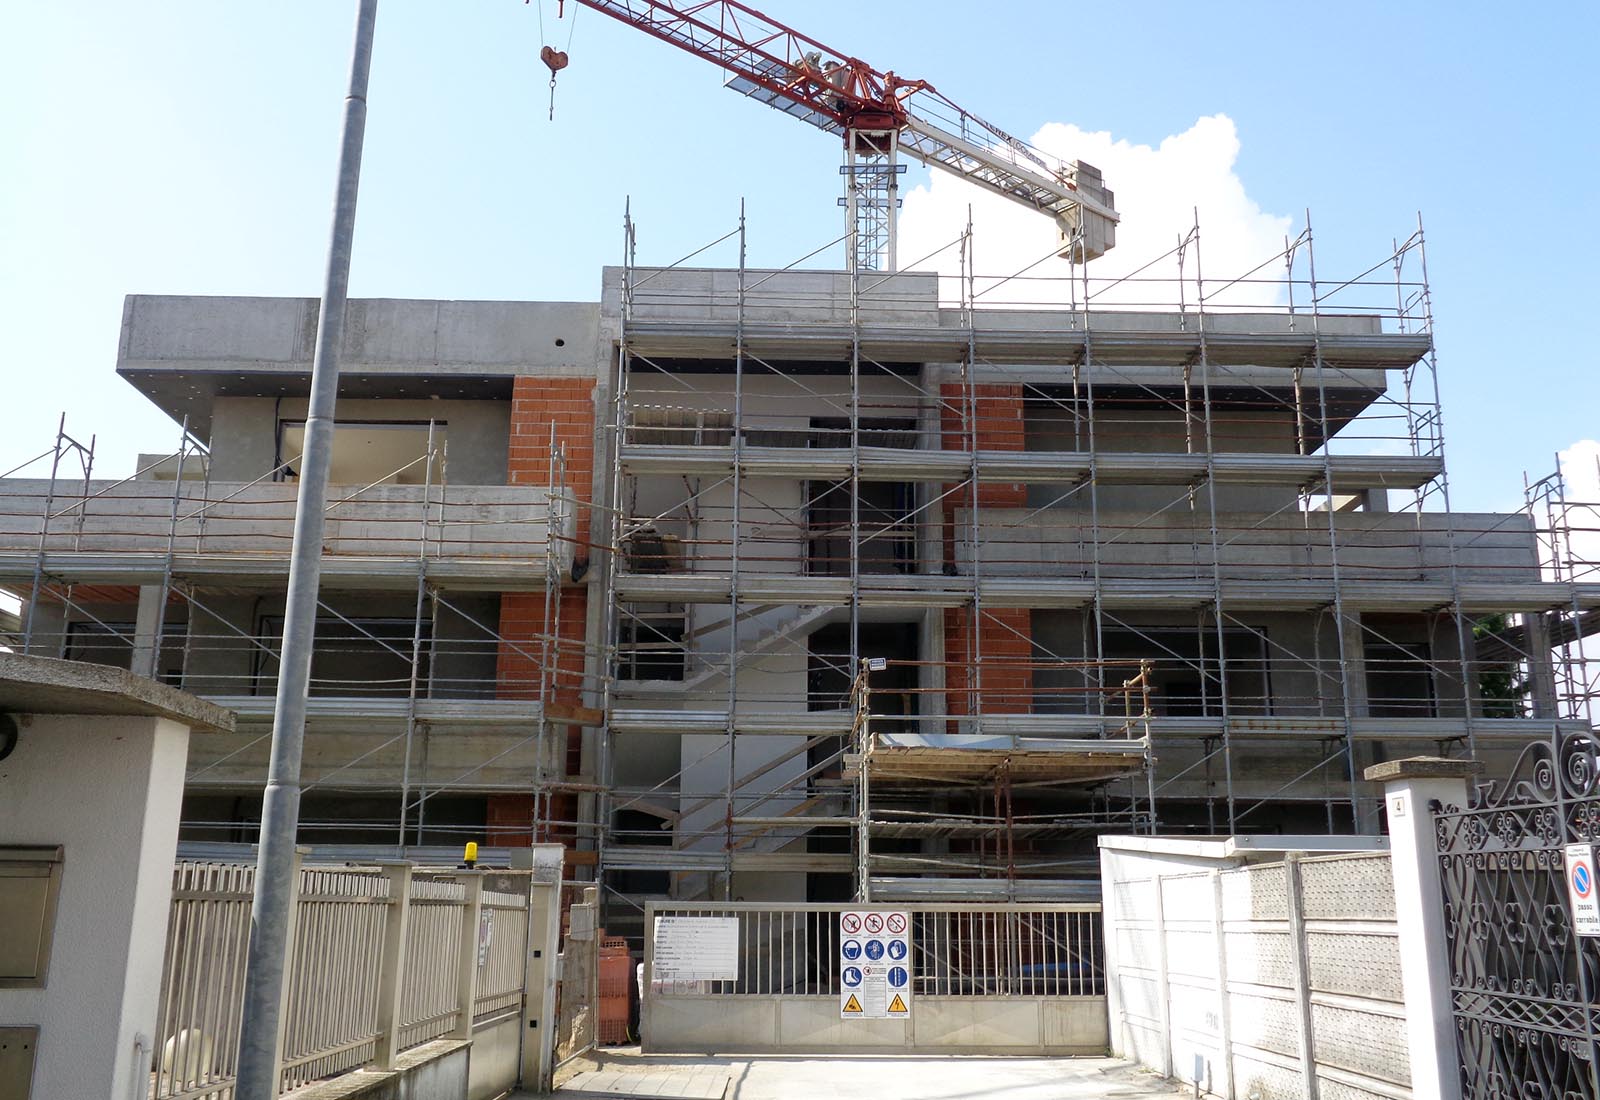 Residential building in Legnano street in Pregnana Milanese - The building site